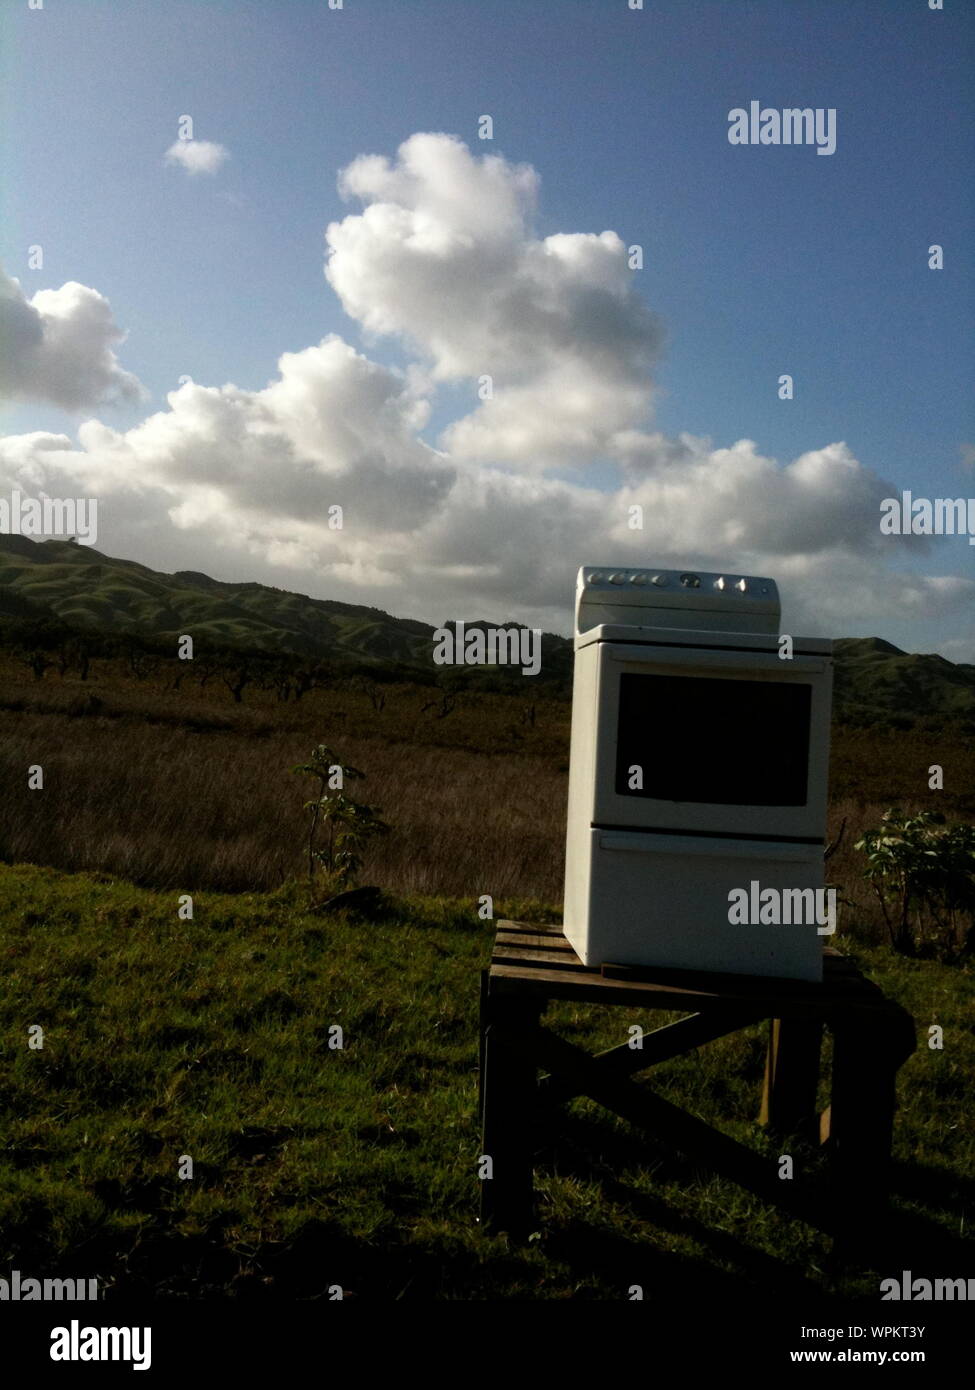 Home Appliance With Table On Grassy Field Against Cloudy Sky During Sunny Day Stock Photo